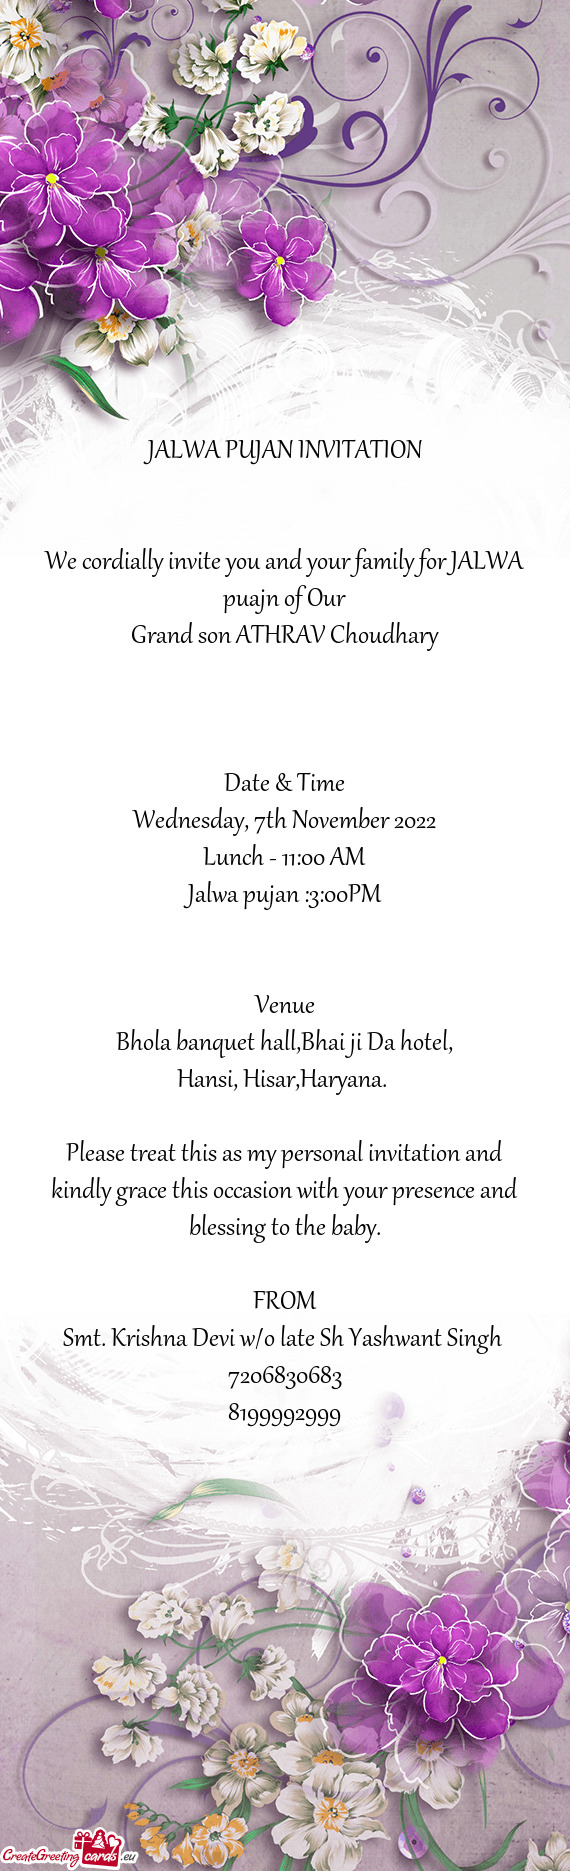 We cordially invite you and your family for JALWA puajn of Our